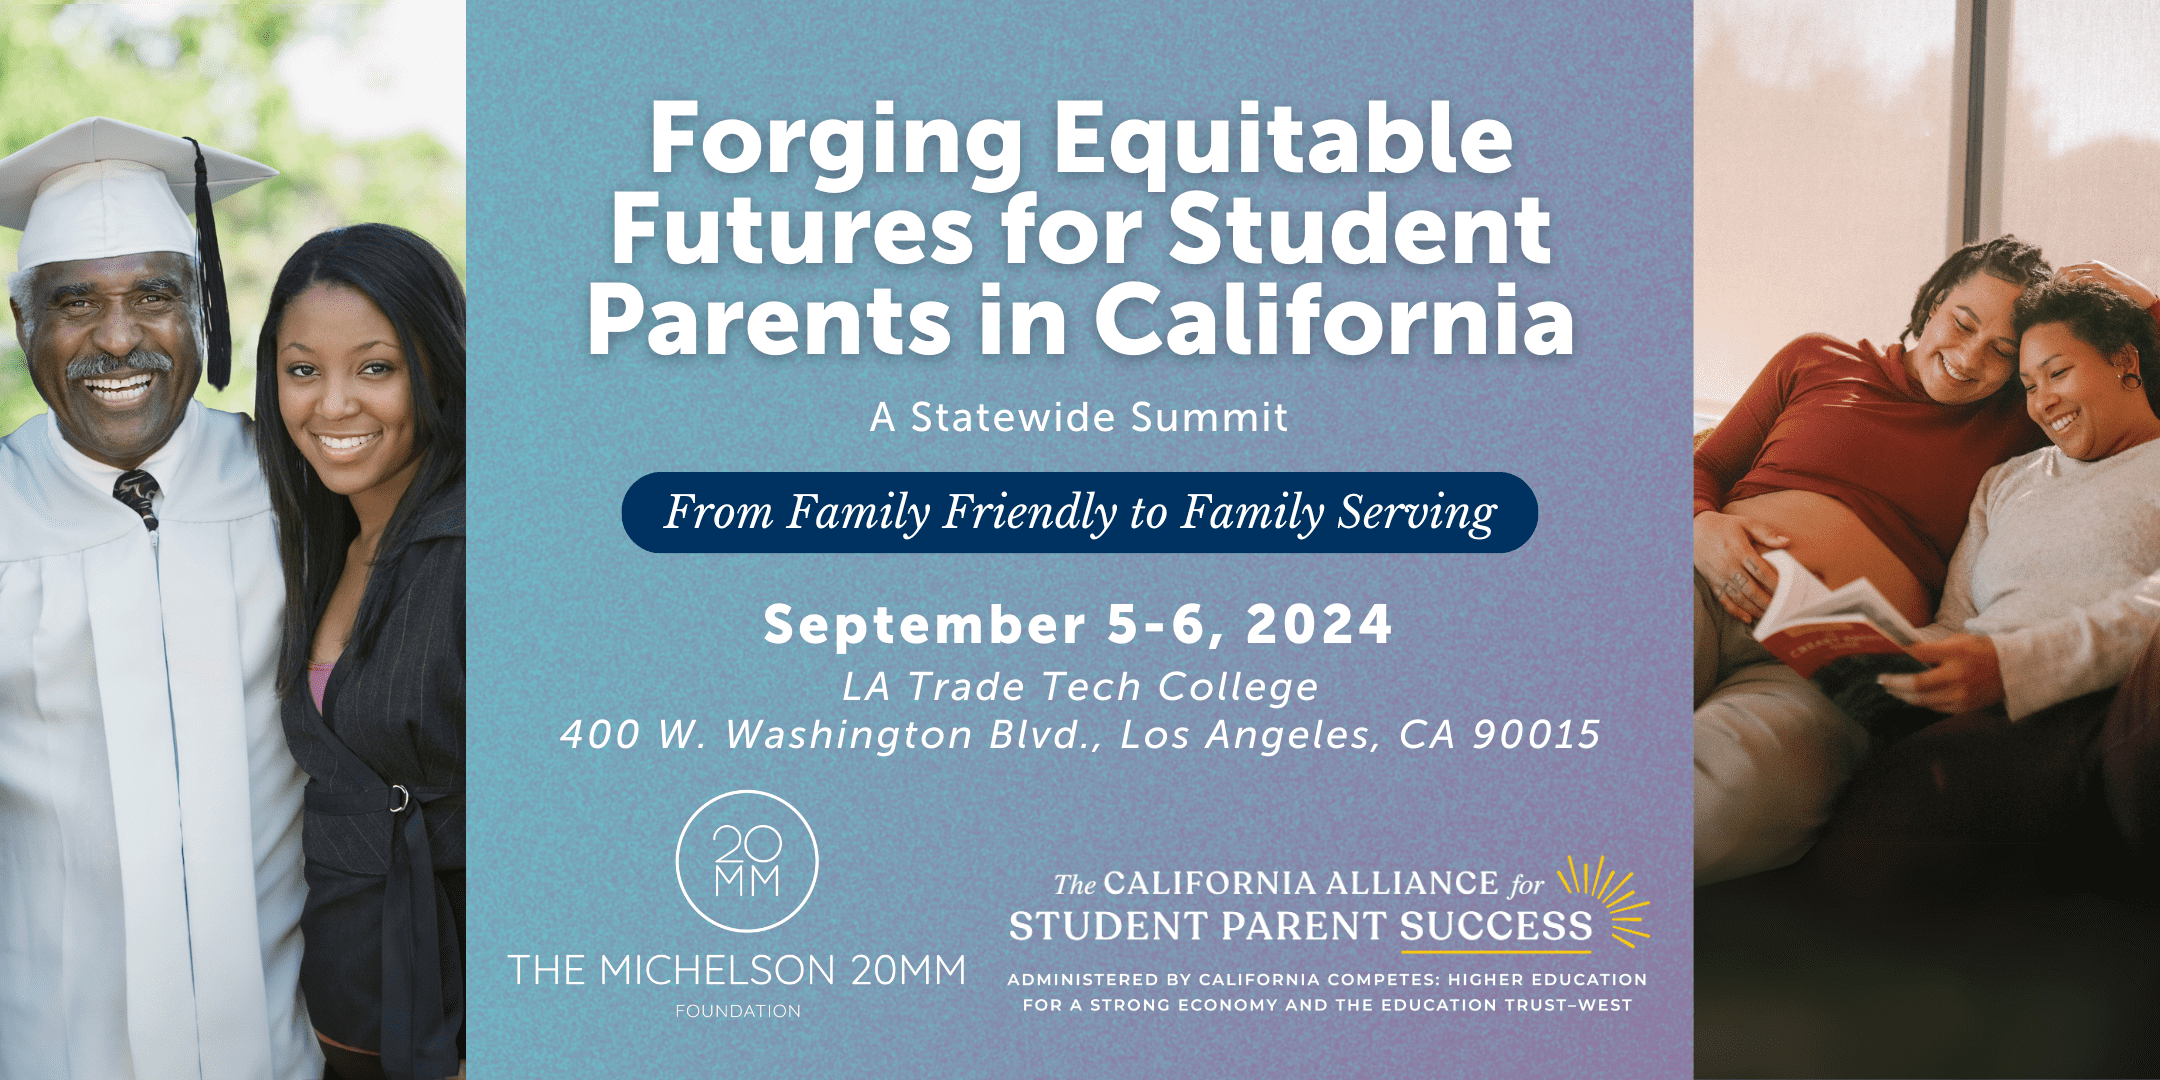 Forging Equitable Futures for Student Parents Summit: From Family Friendly to Family Serving